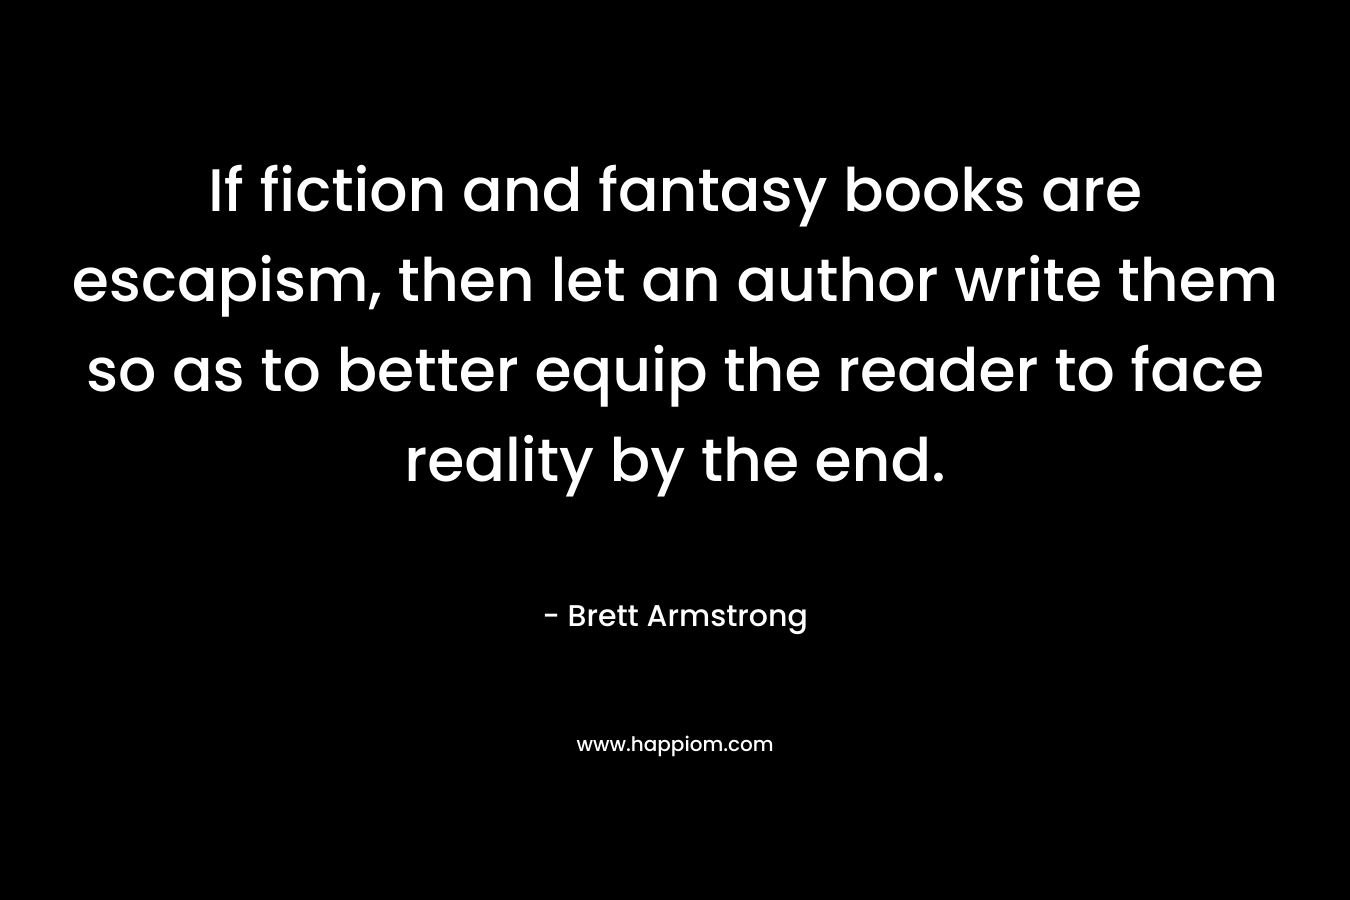 If fiction and fantasy books are escapism, then let an author write them so as to better equip the reader to face reality by the end.